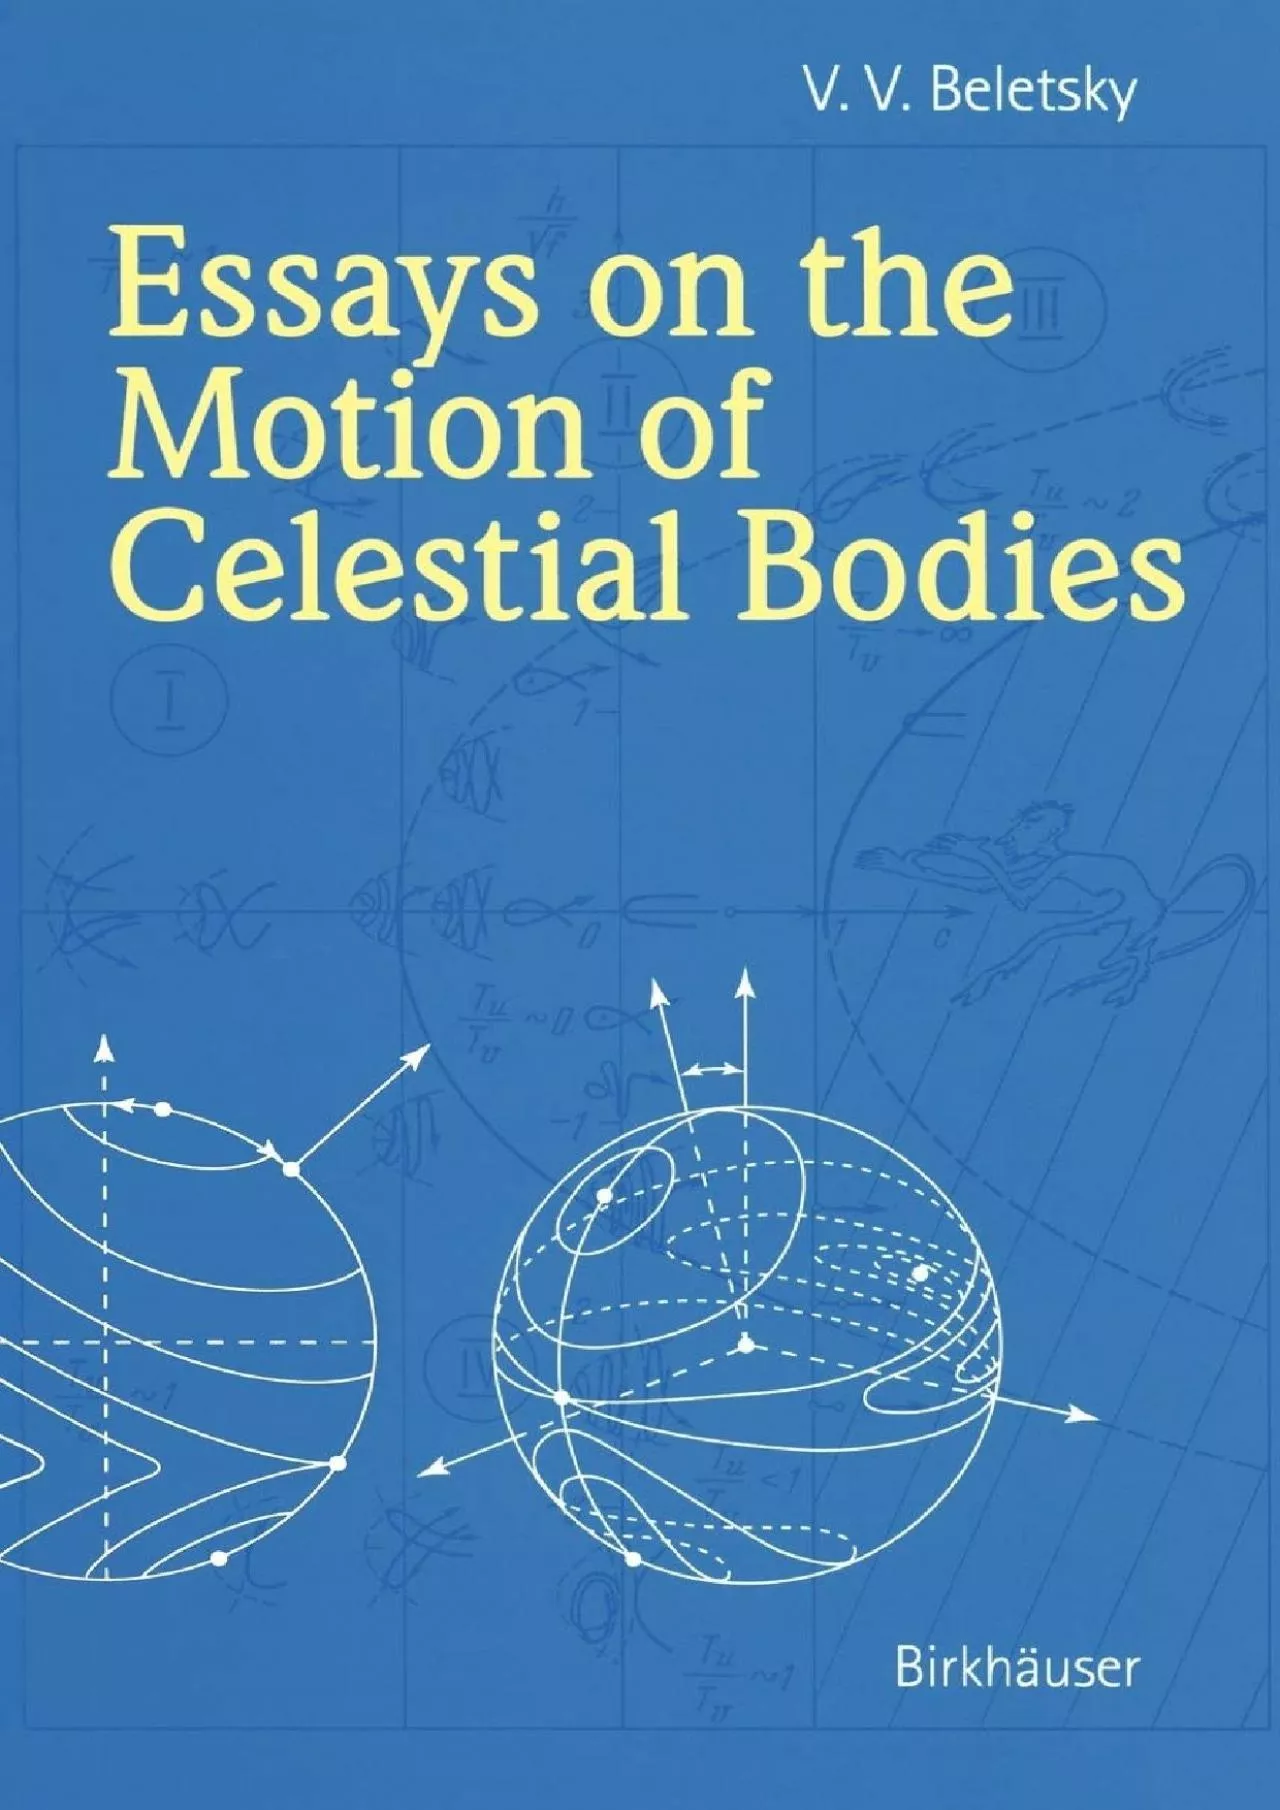 (BOOK)-Essays on the Motion of Celestial Bodies